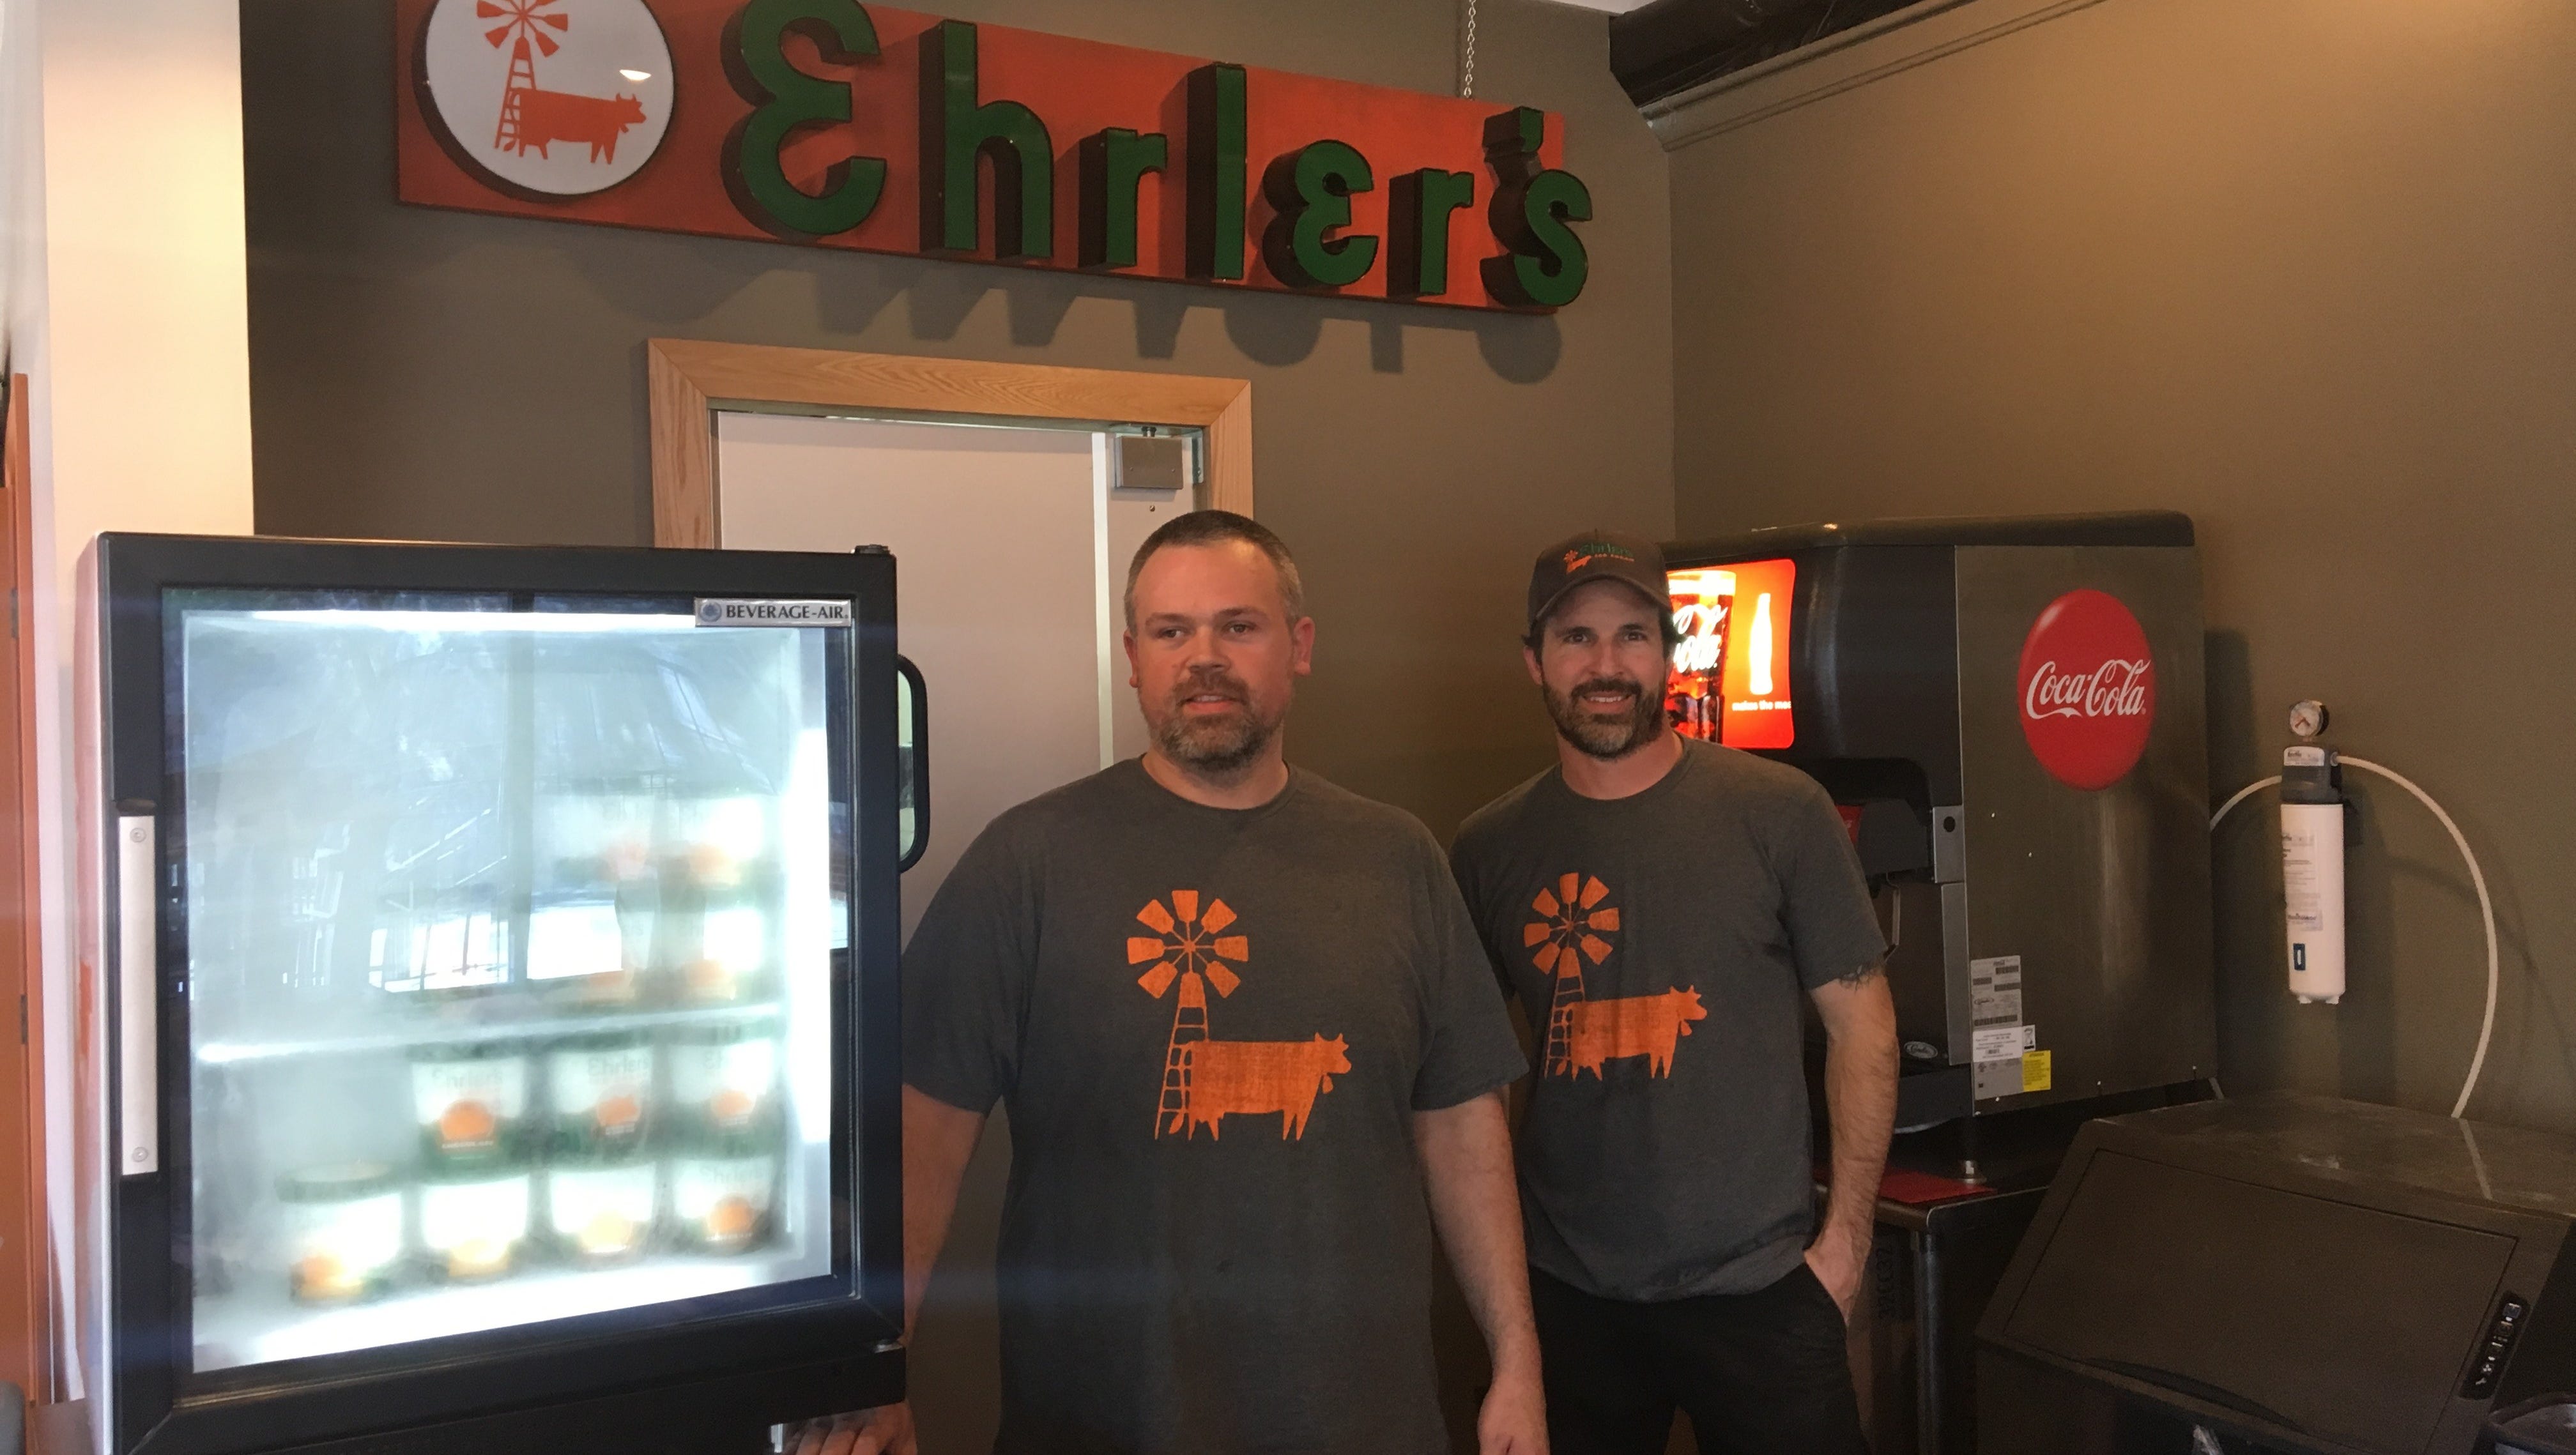 Ehrler's Ice Cream is back with so many sweet memories for Louisville